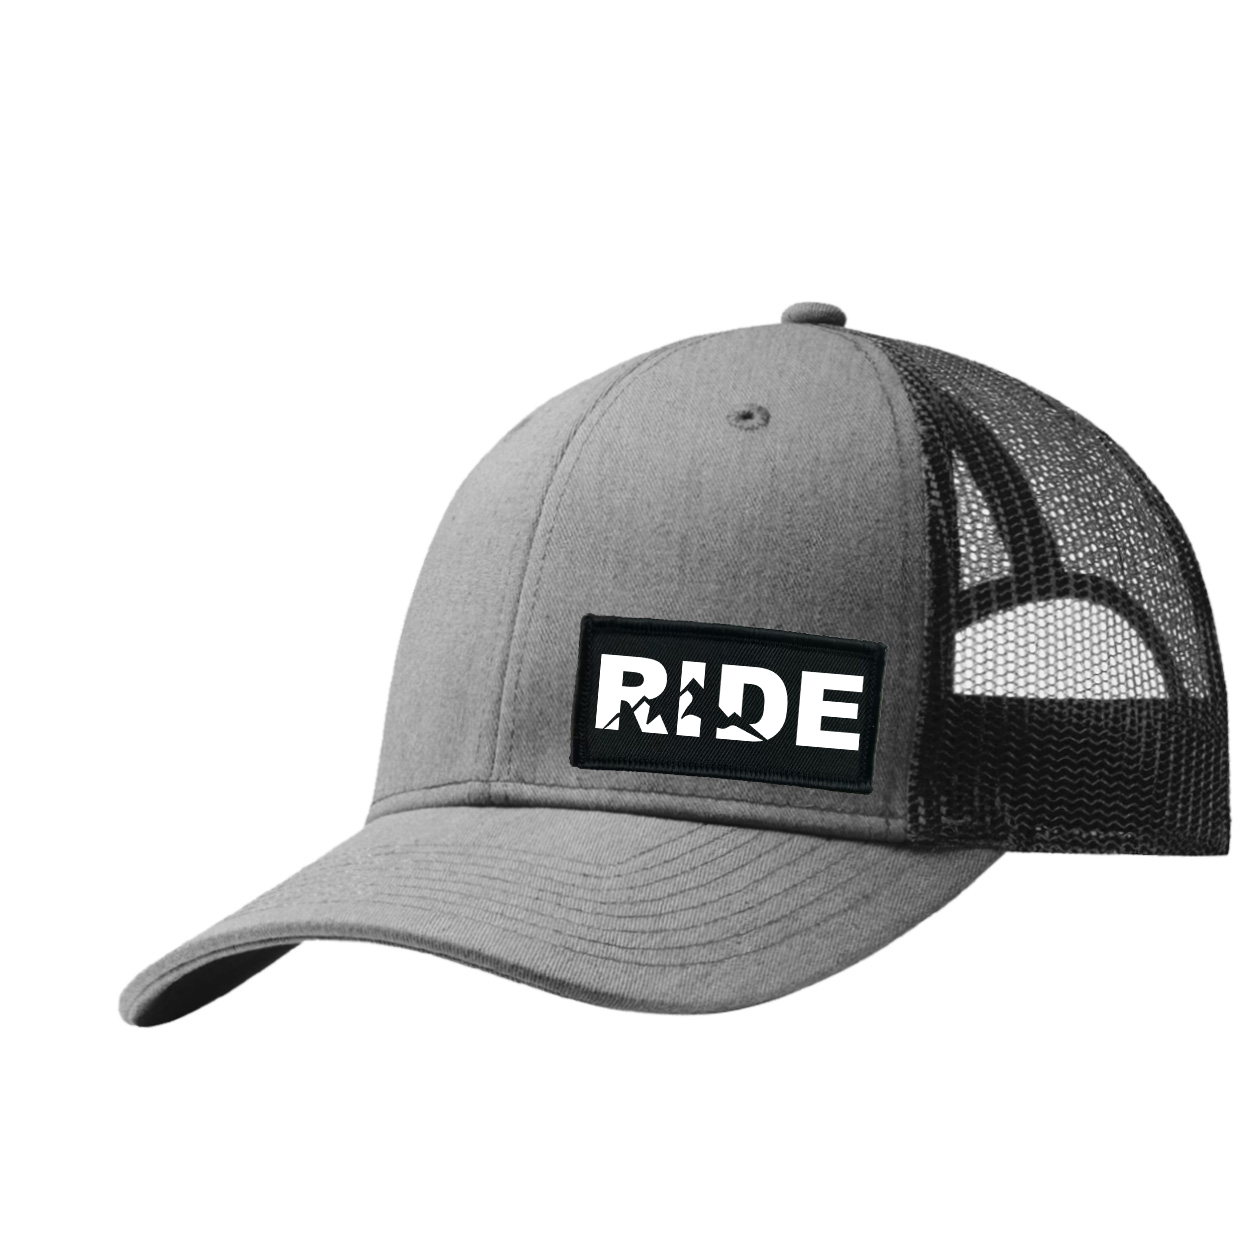 Ride Mountain Logo Night Out Woven Patch Snapback Trucker Hat Heather Gray/Black (White Logo)